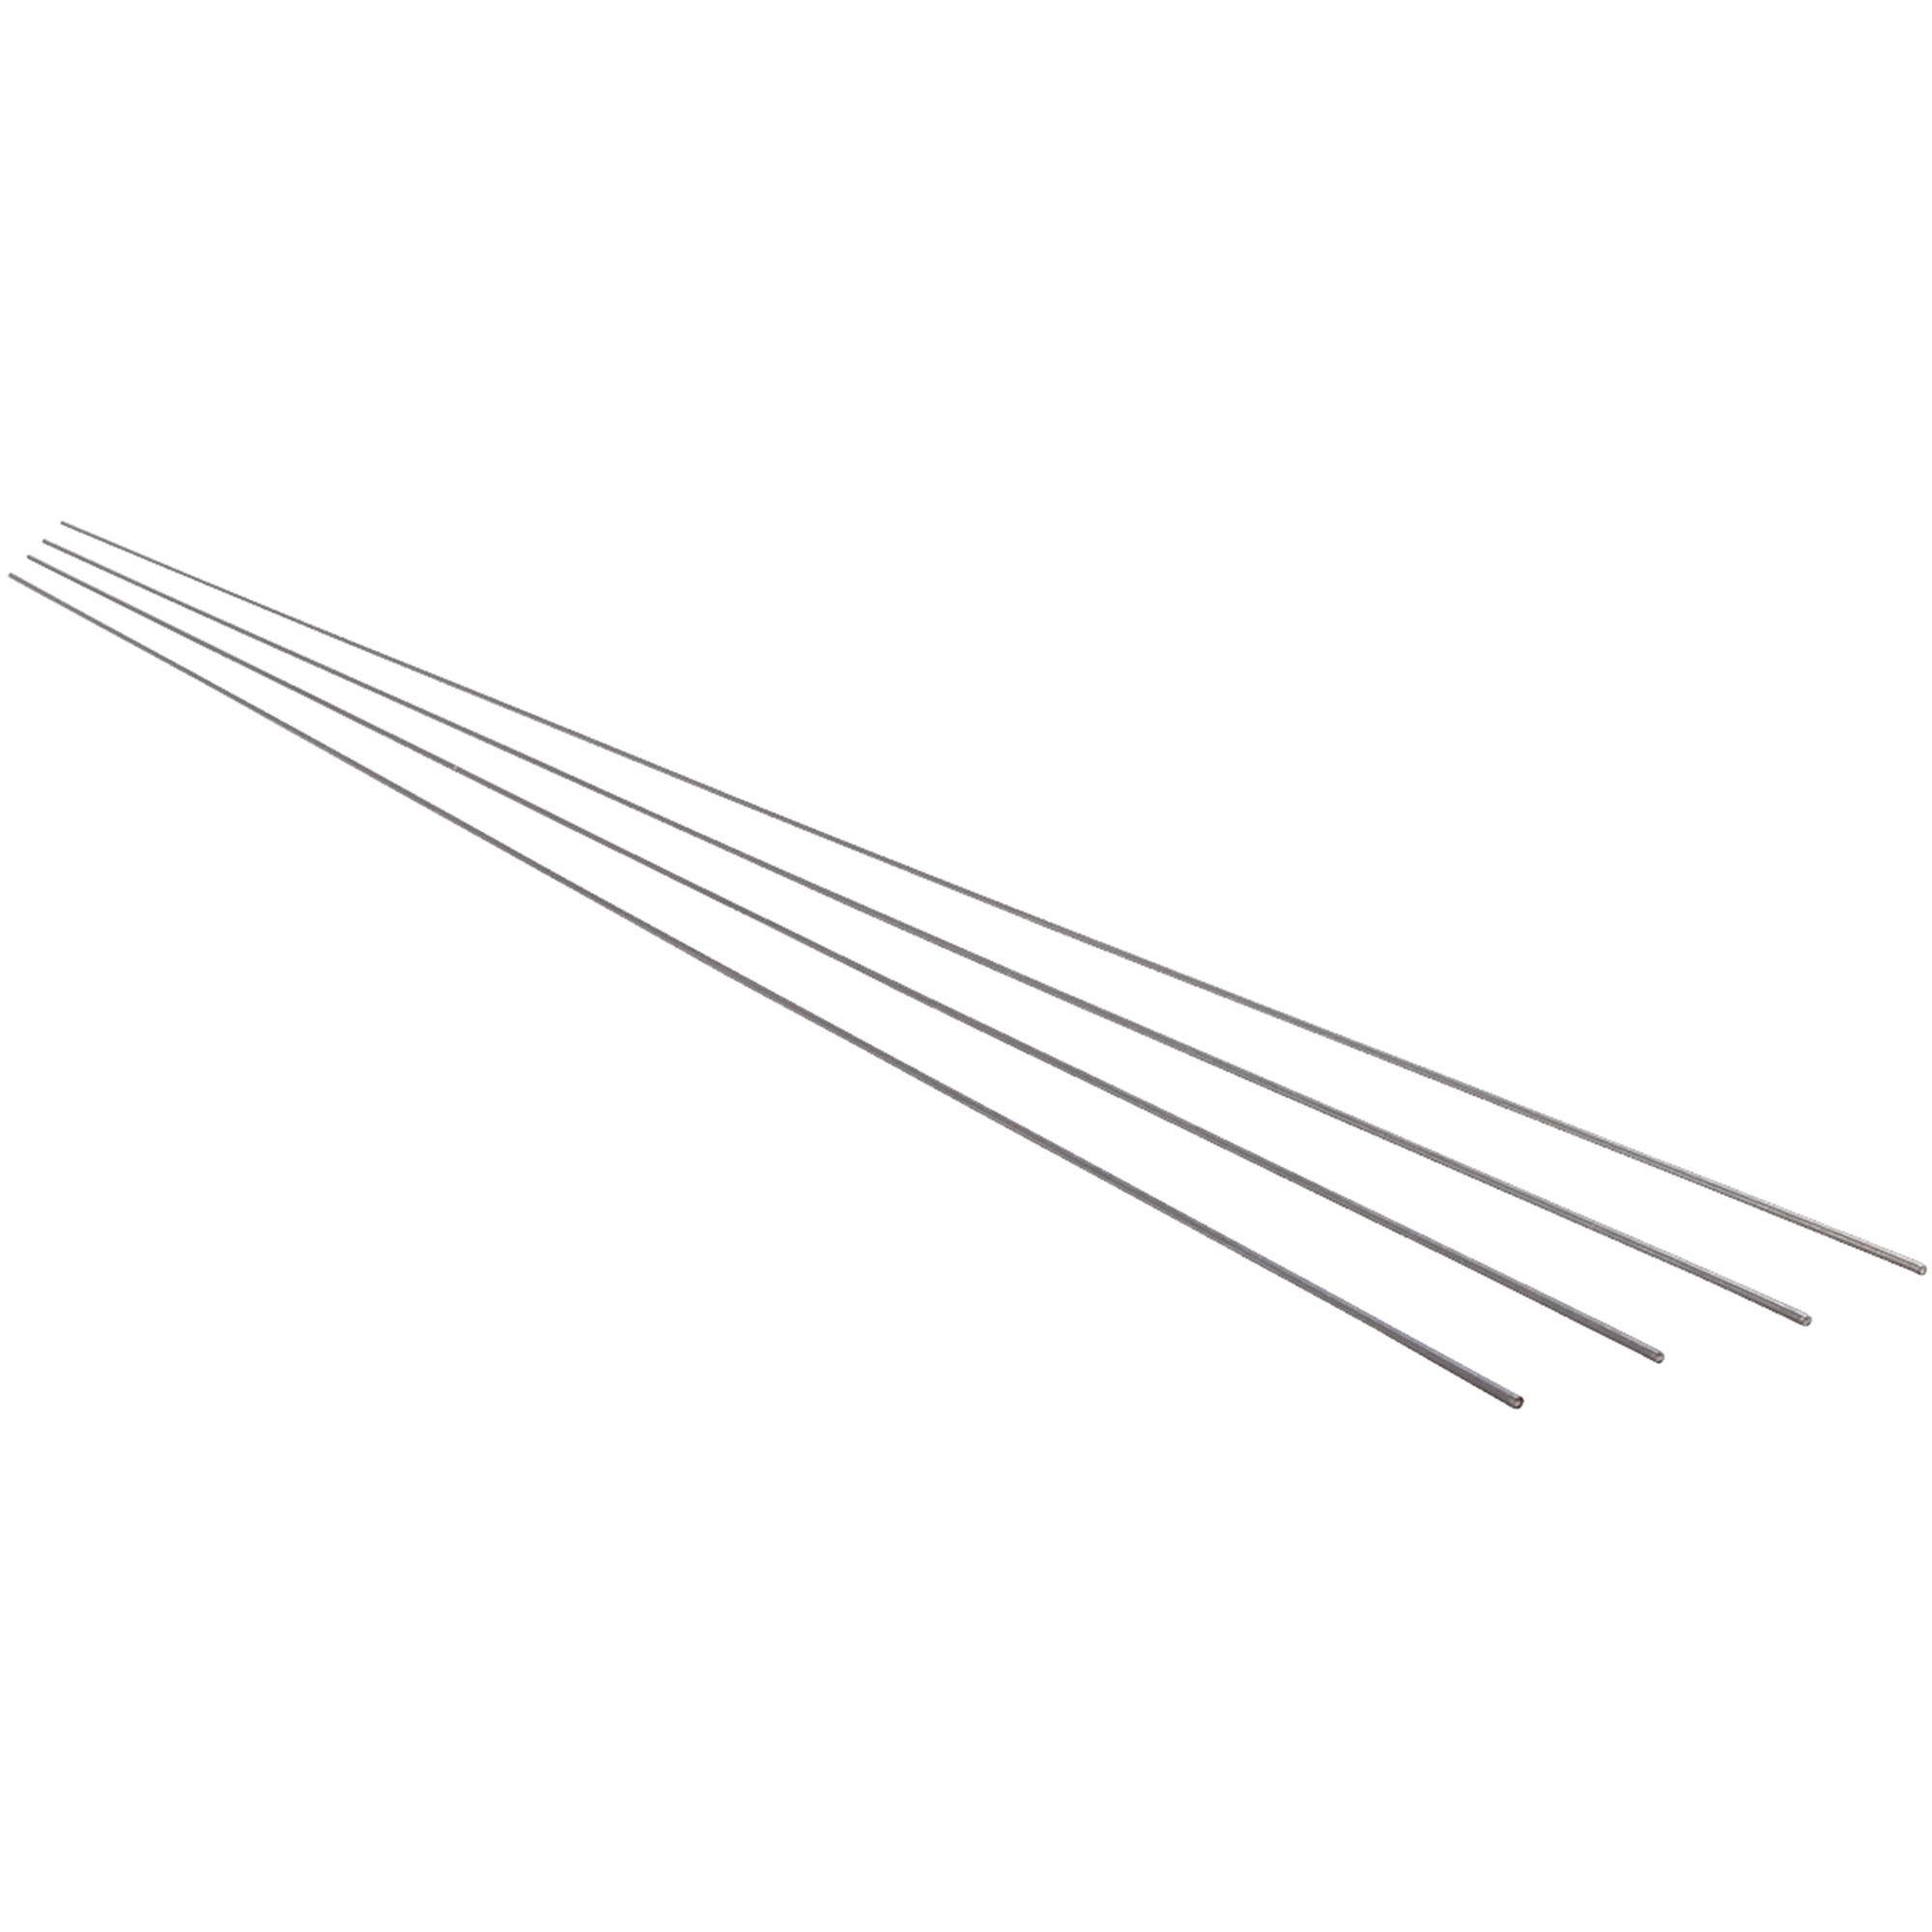 K&S Music Wire 0.078" D x 36" L Pack